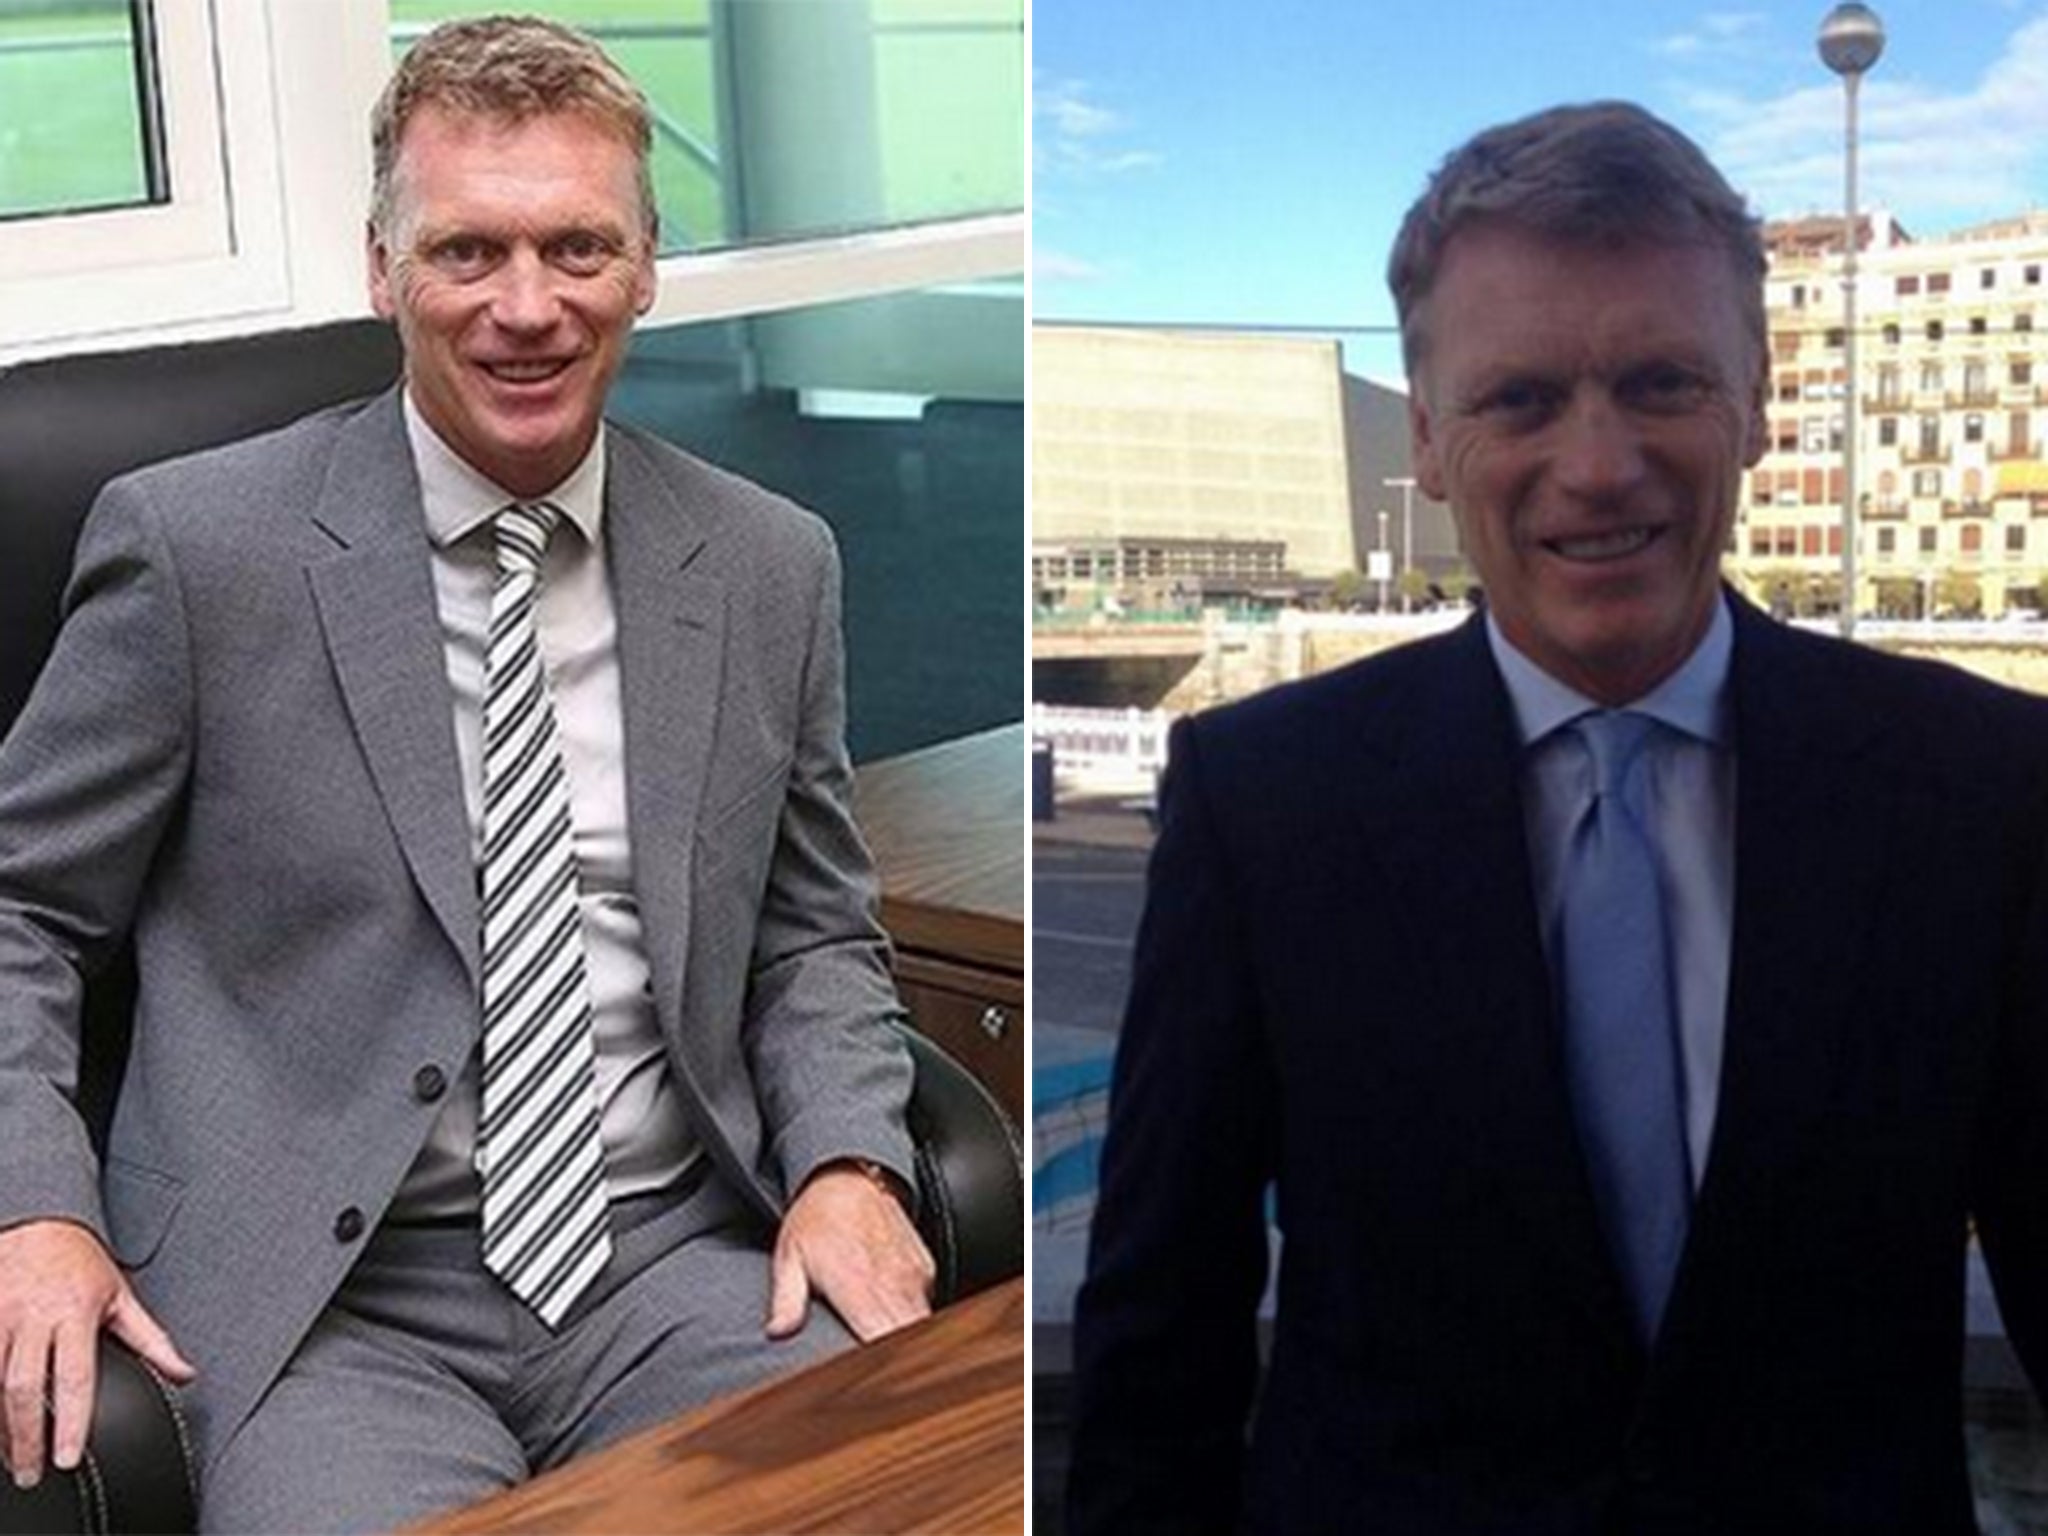 David Moyes on his arrival at Manchester United (left) and Real Sociedad